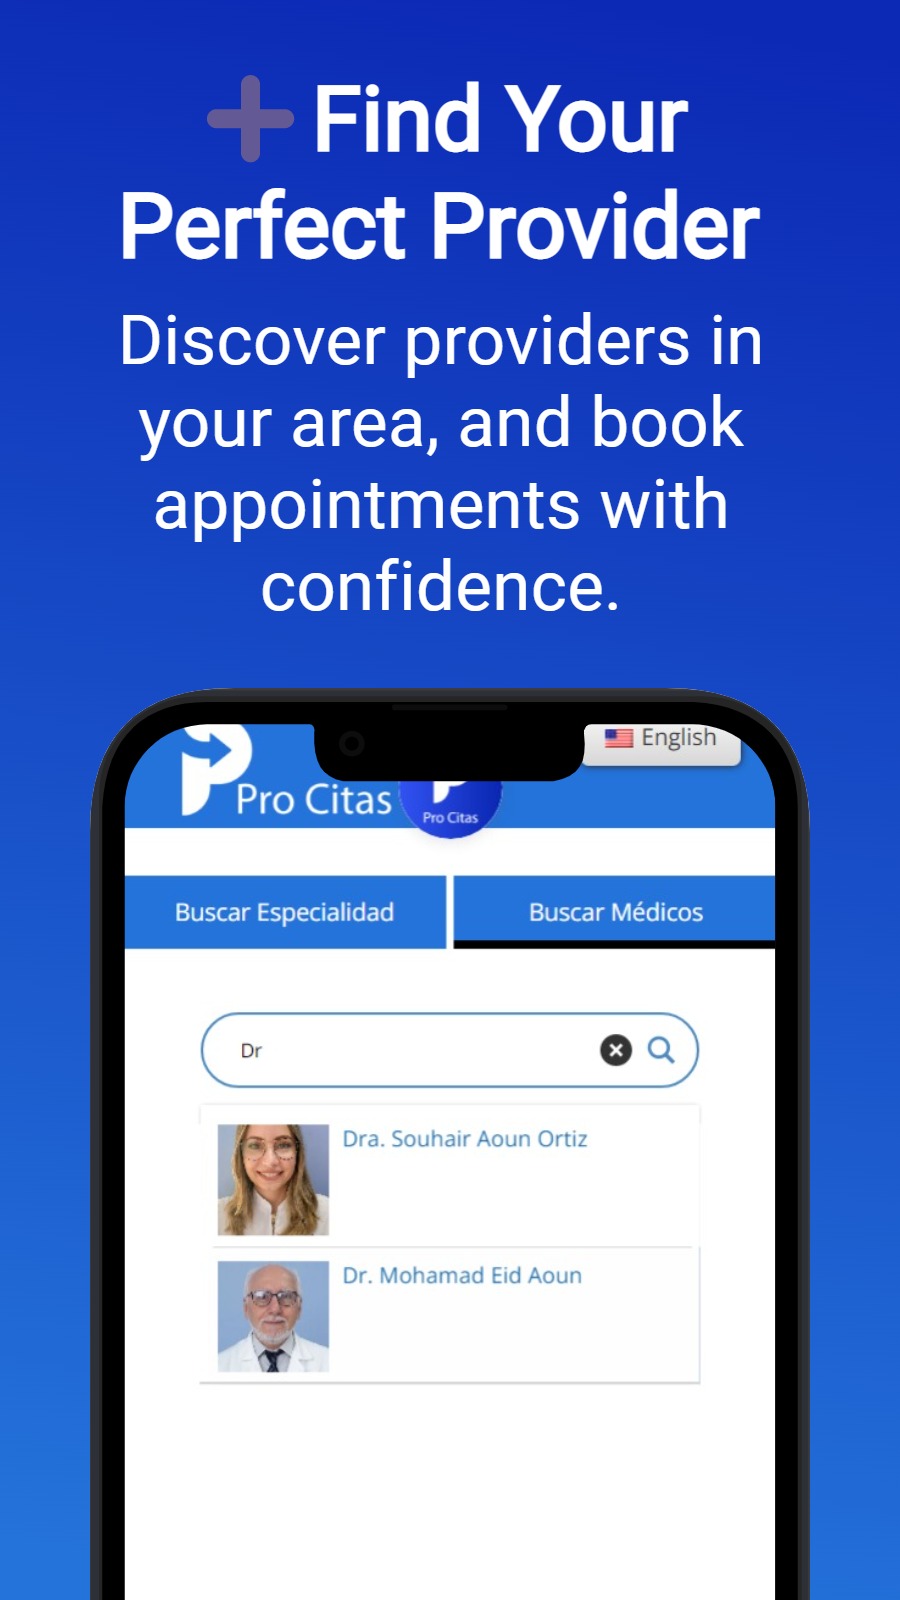 ➕Find Your Perfect Provider - Discover providers in your area, and book appointments with confidence.